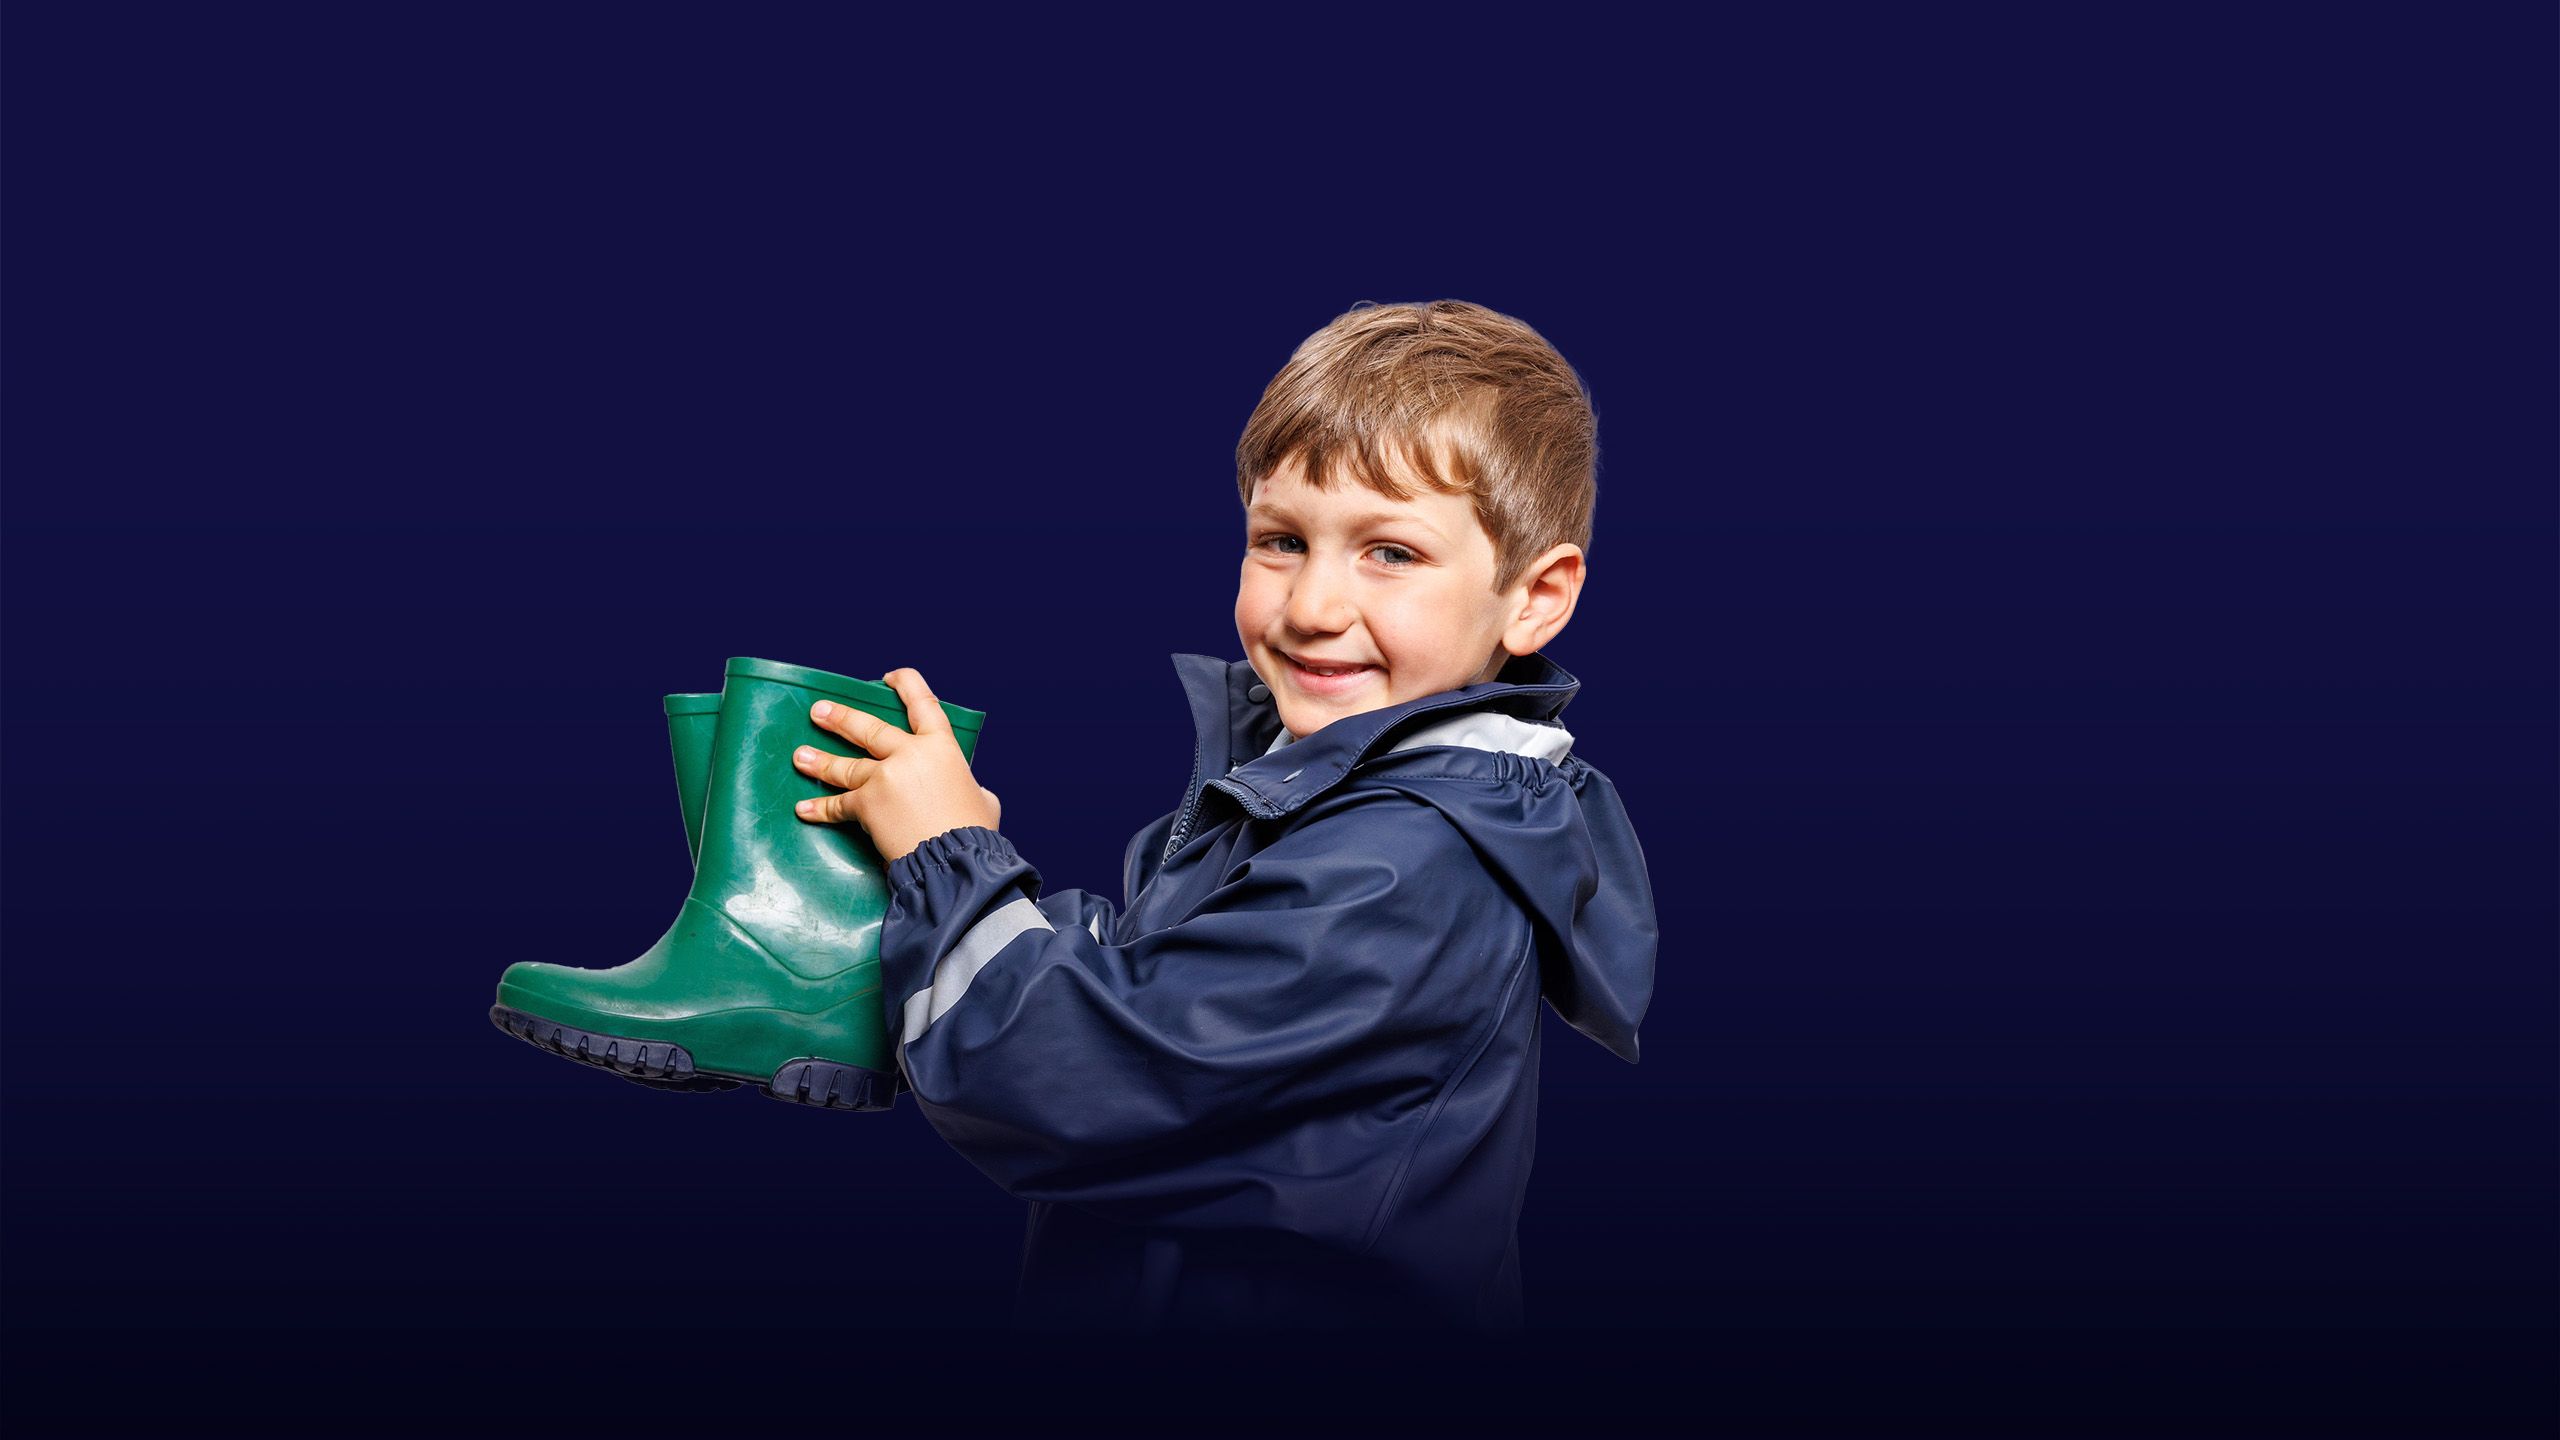 Image of a little boy holding green wellies with an overlay of the text "inspiring minds"